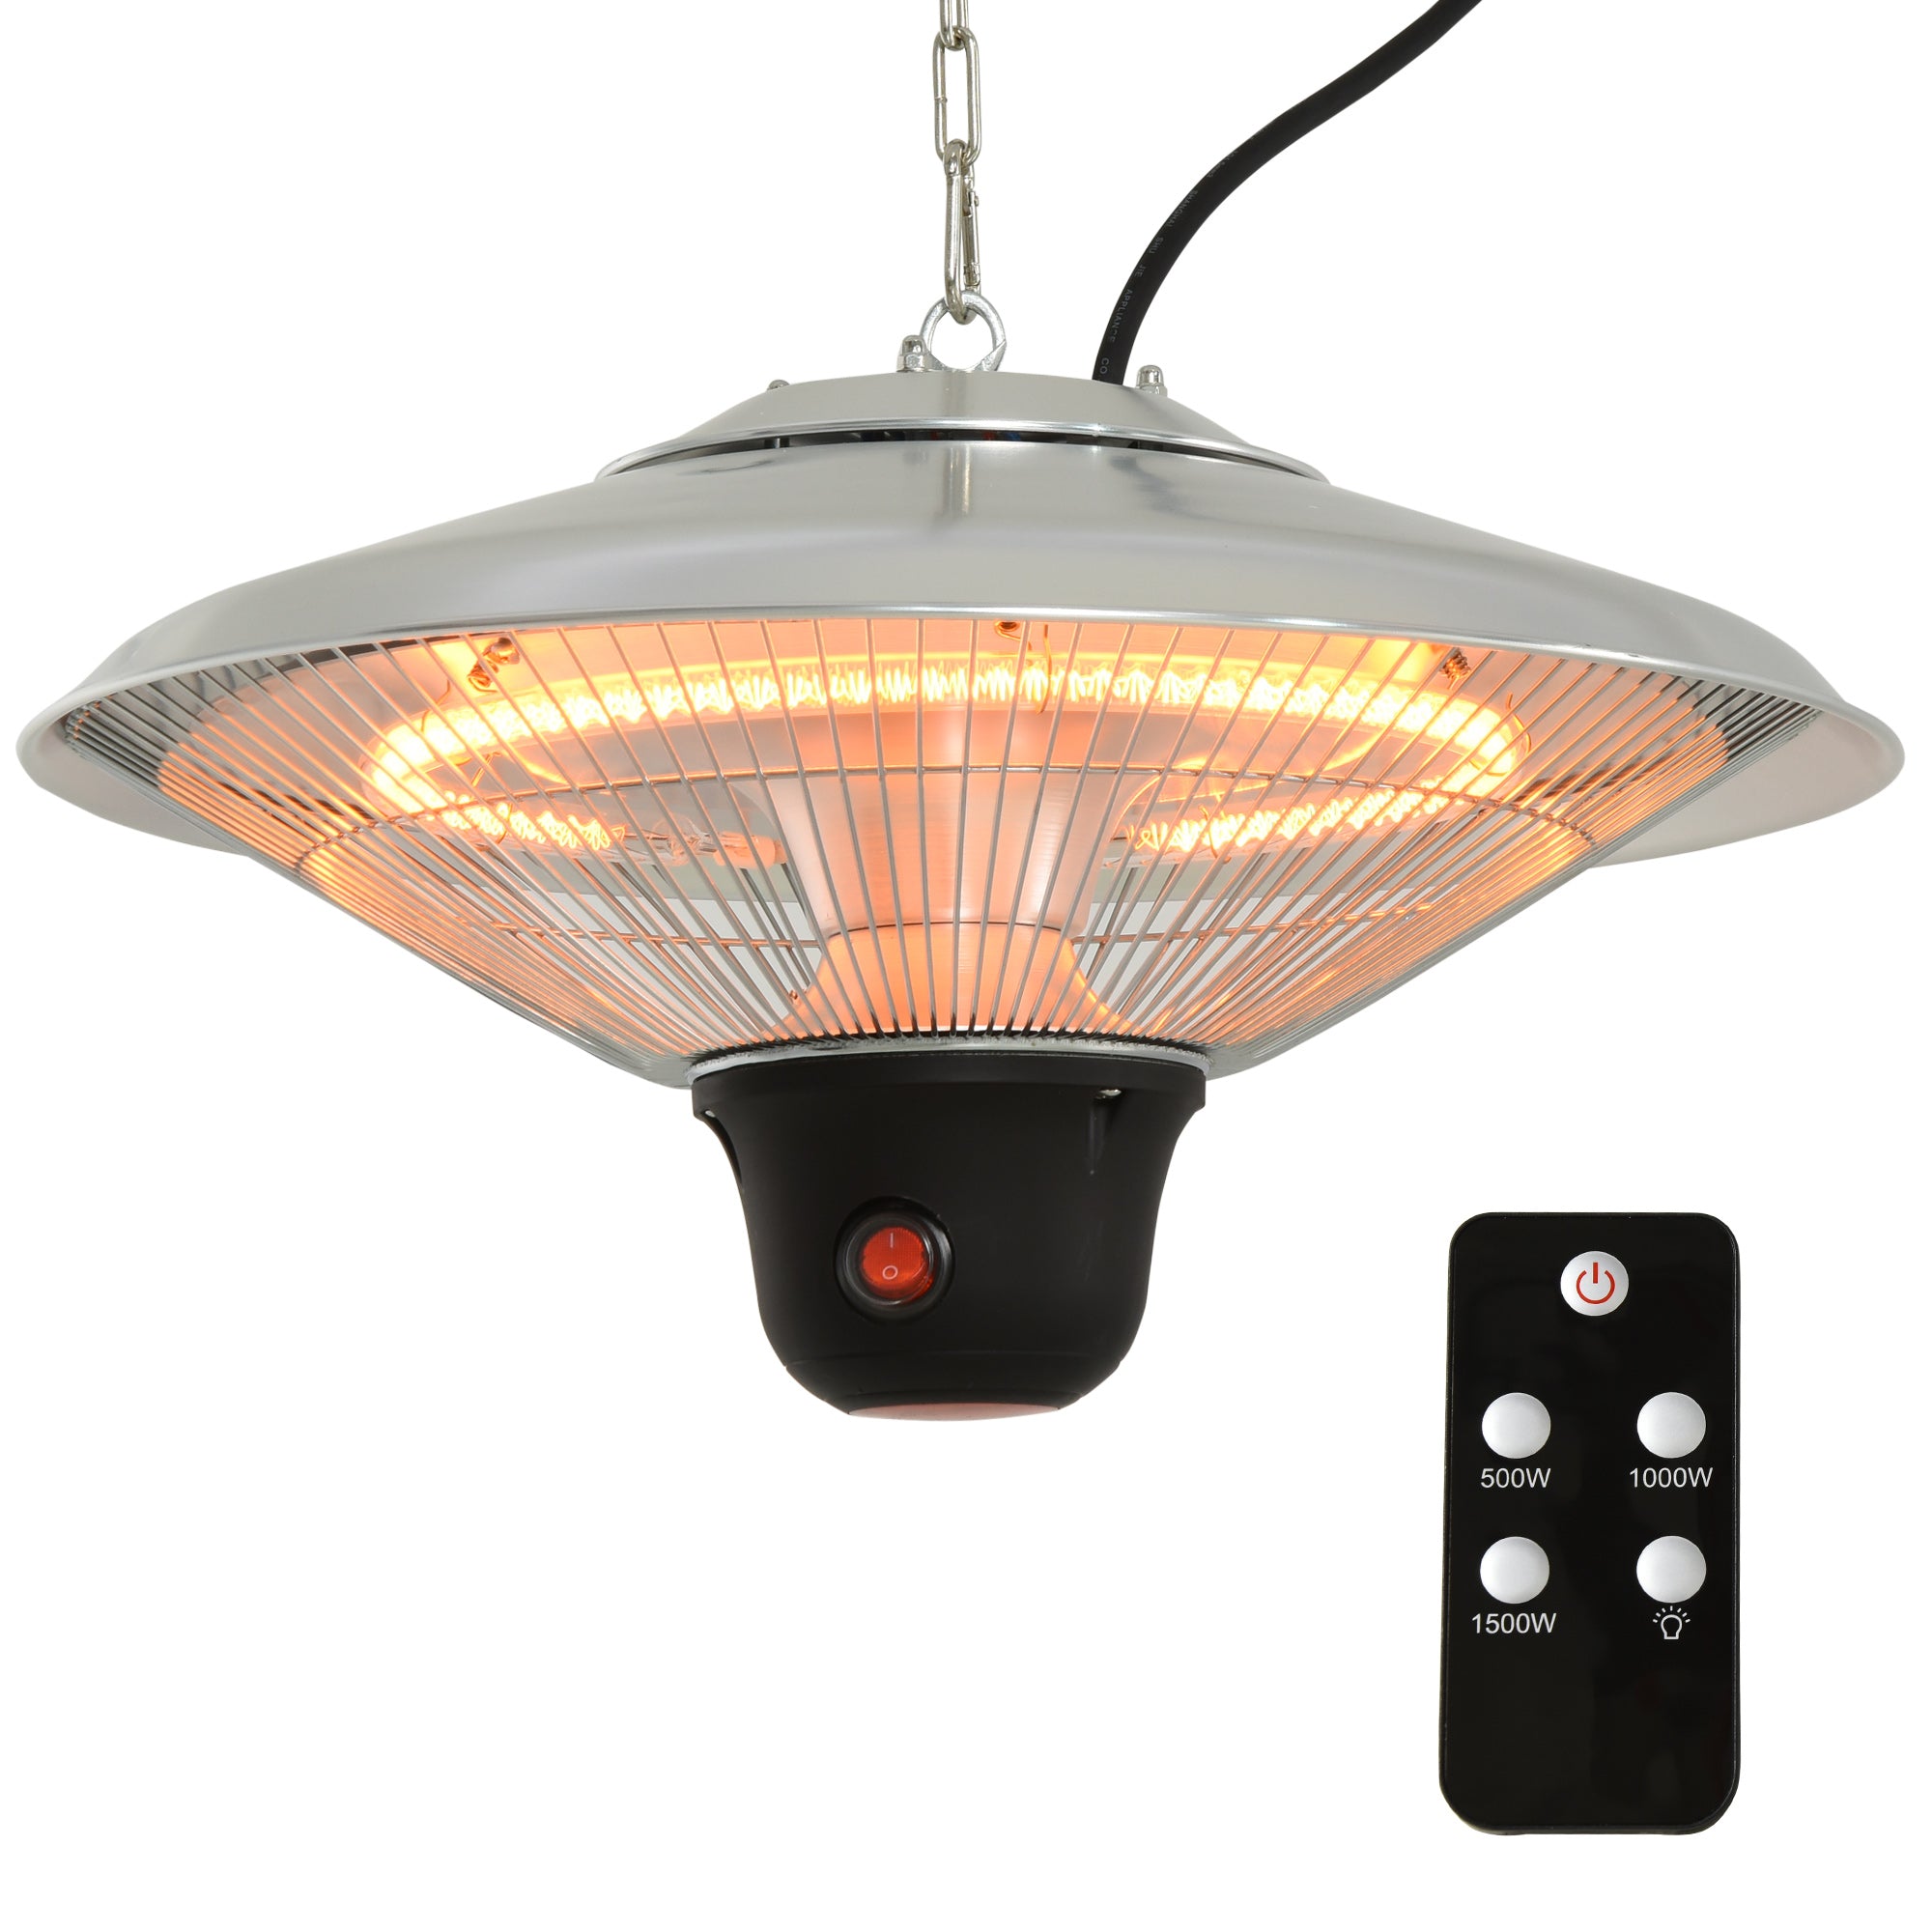 Outsunny Patio Ceiling Hanging Heater 1500W Electric Aluminium Remote Control  | TJ Hughes